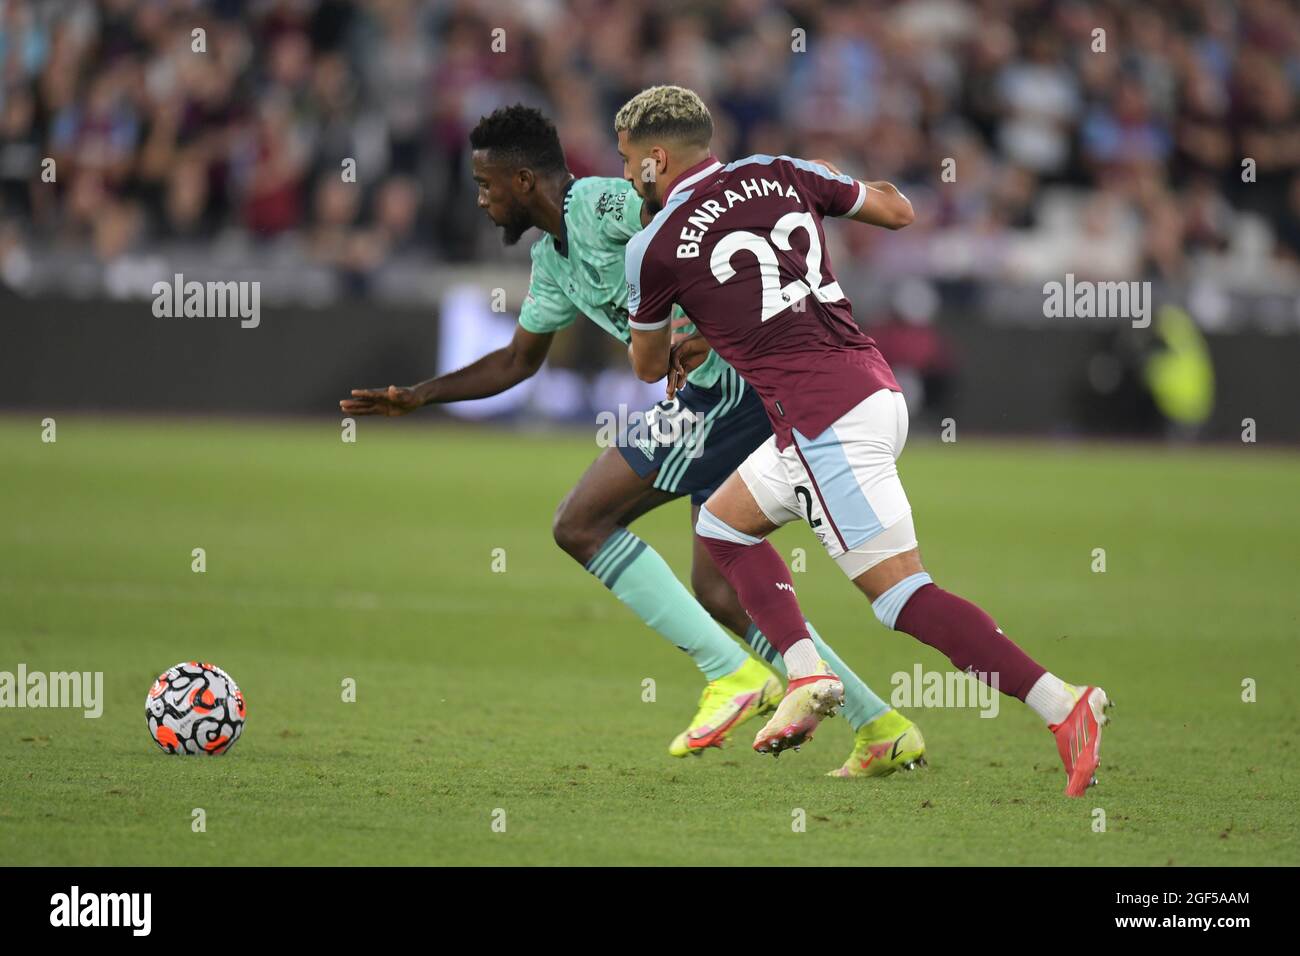 London, UK. 23rd Aug, 2021. 23rd August The London Stadium, Stratford London. Said Benrahma of West Ham Utd and Wilfred Ndidi of Leicester City during the West Ham vs Leicester City Premier League match at the London Stadium. Credit: MARTIN DALTON/Alamy Live News Stock Photo